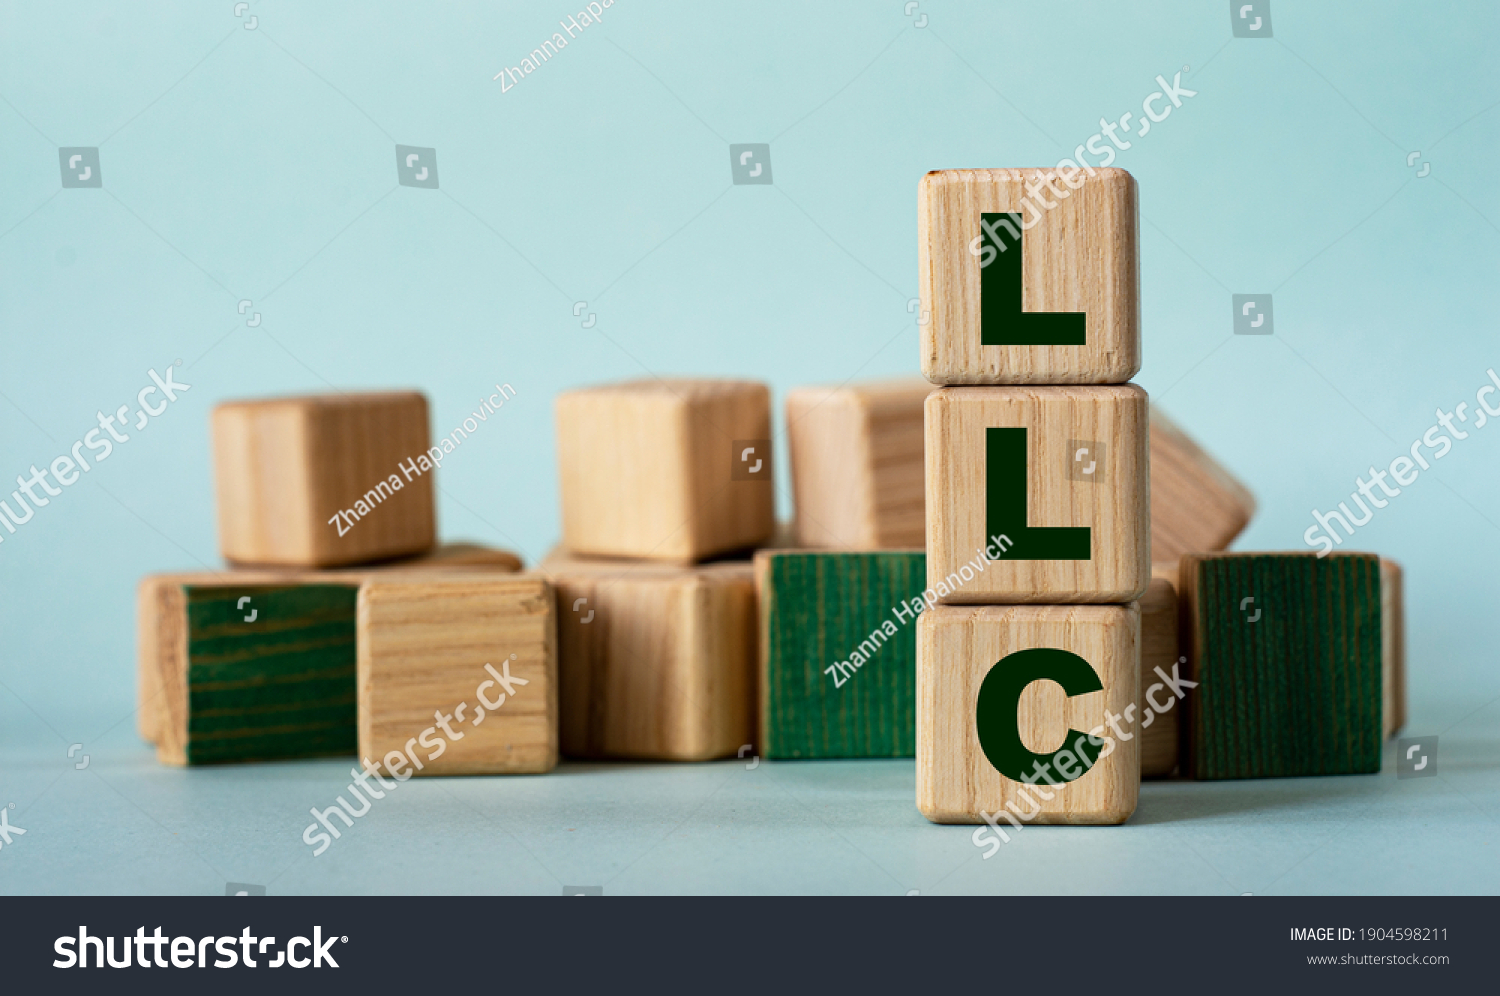 LLC (Limited Liability Company) - acronym on wooden cubes on a background of colored block on a light background. Business concept #1904598211